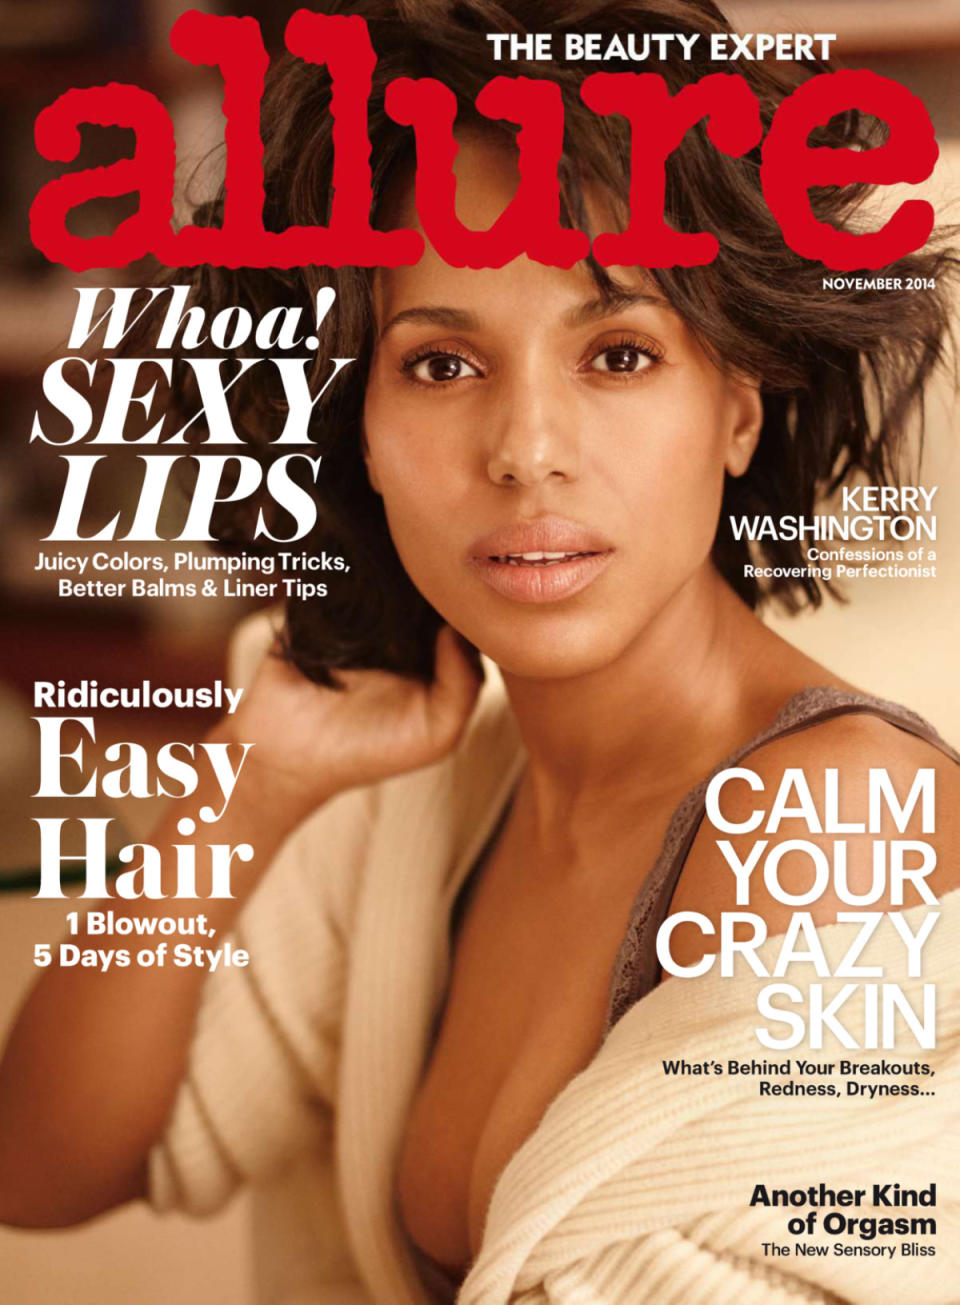 Kerry Washington on the November 2014 cover of “Allure.”